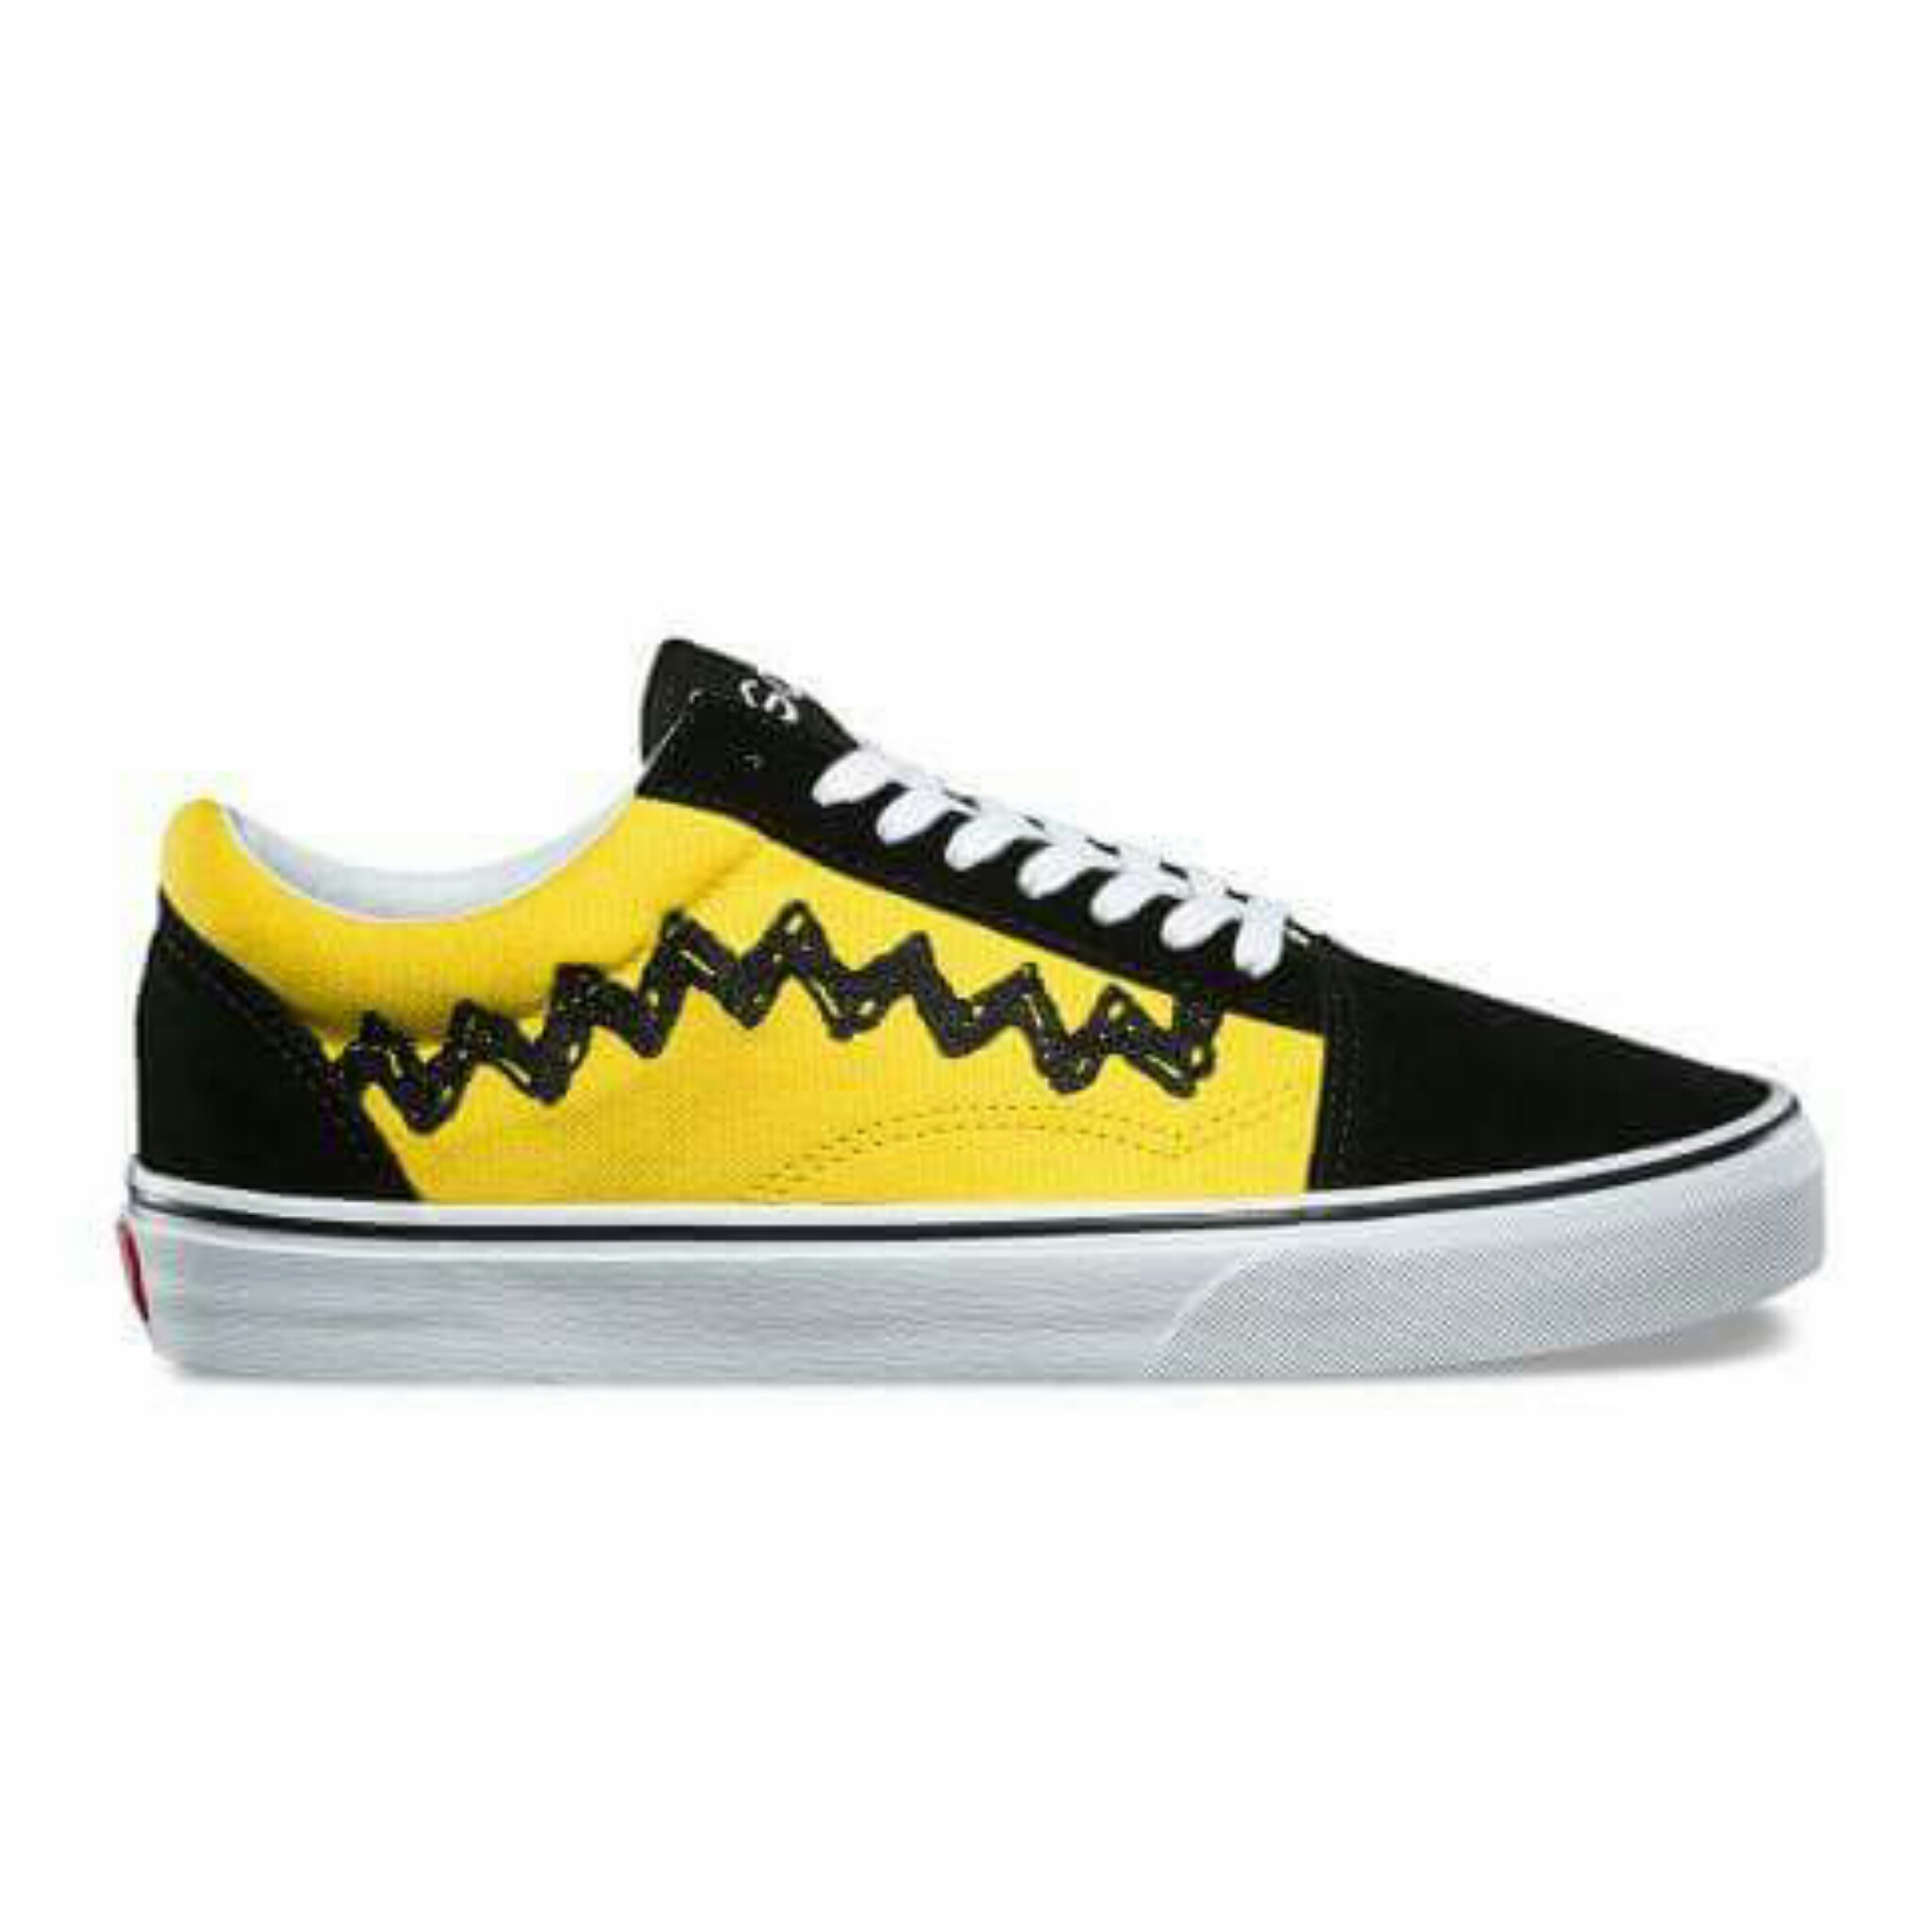 vans shoes yellow and black